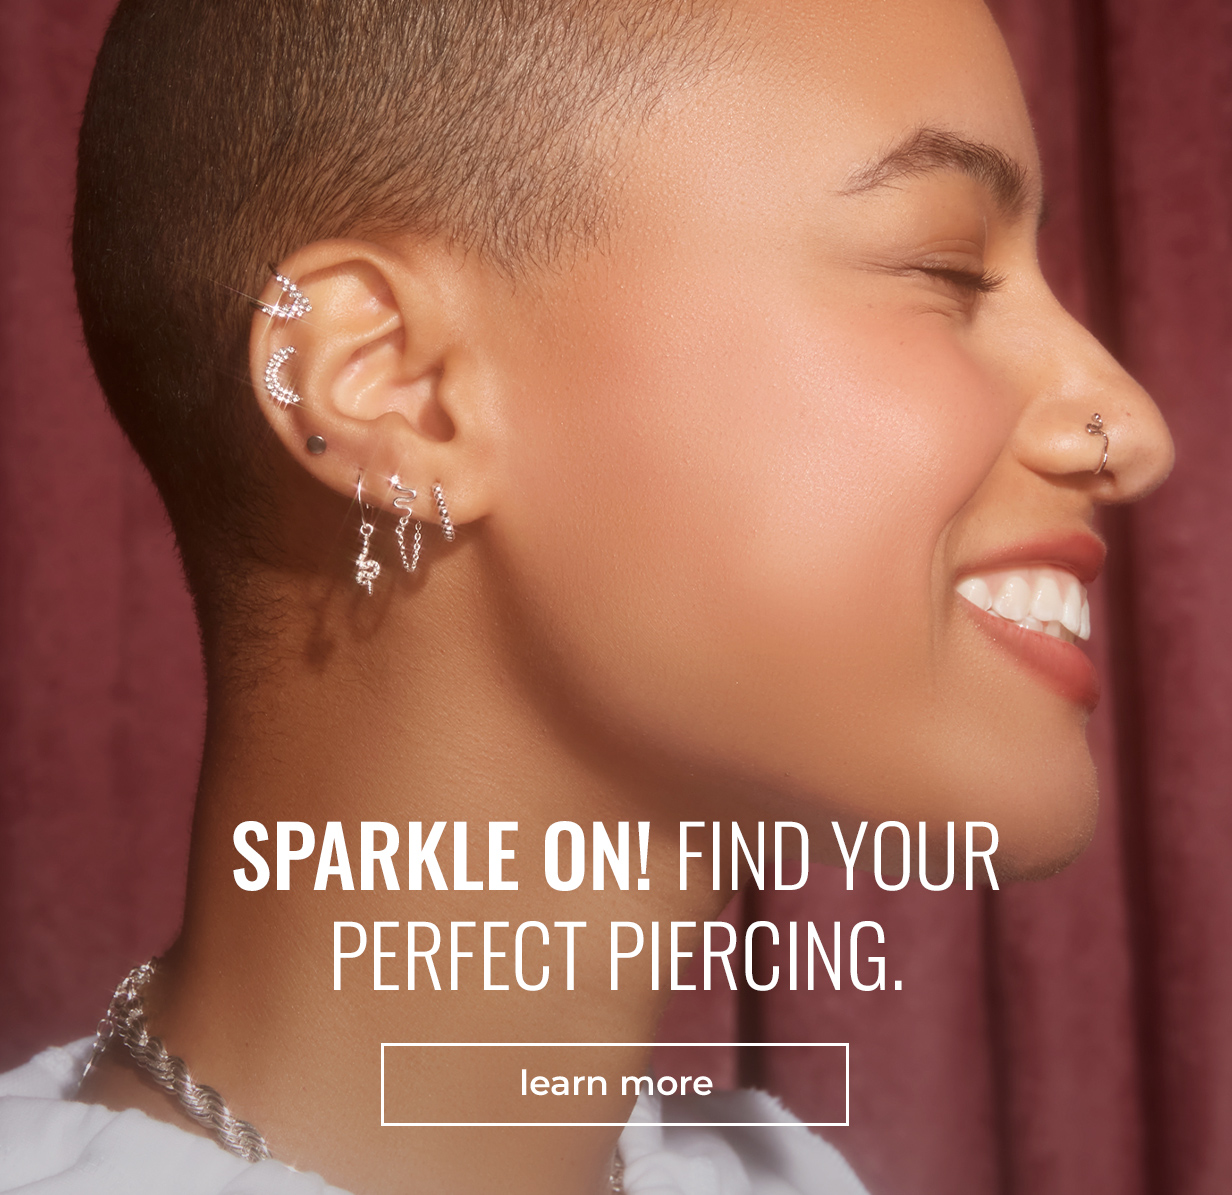 Sparkle On! Find your perfect piercing.